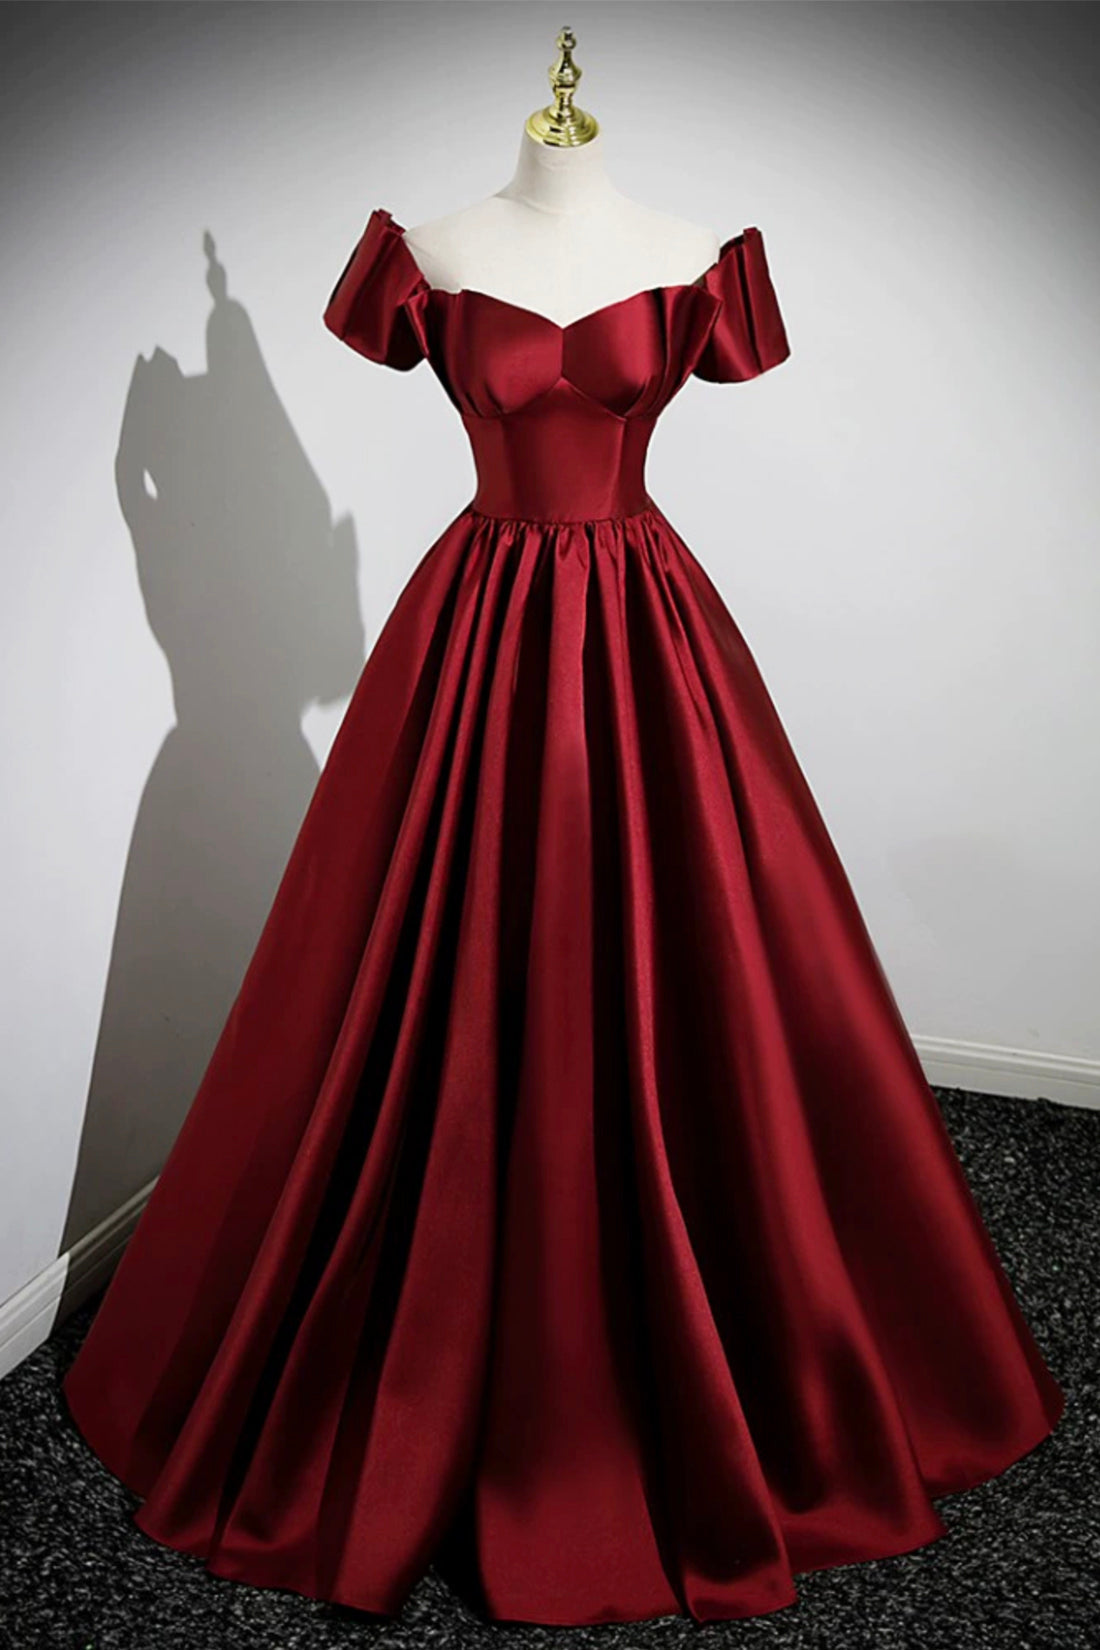 Prom Dresses 2032 Cheap, A-Line Burgundy Satin Floor Length Prom Dress, Off the Shoulder New Party Dress